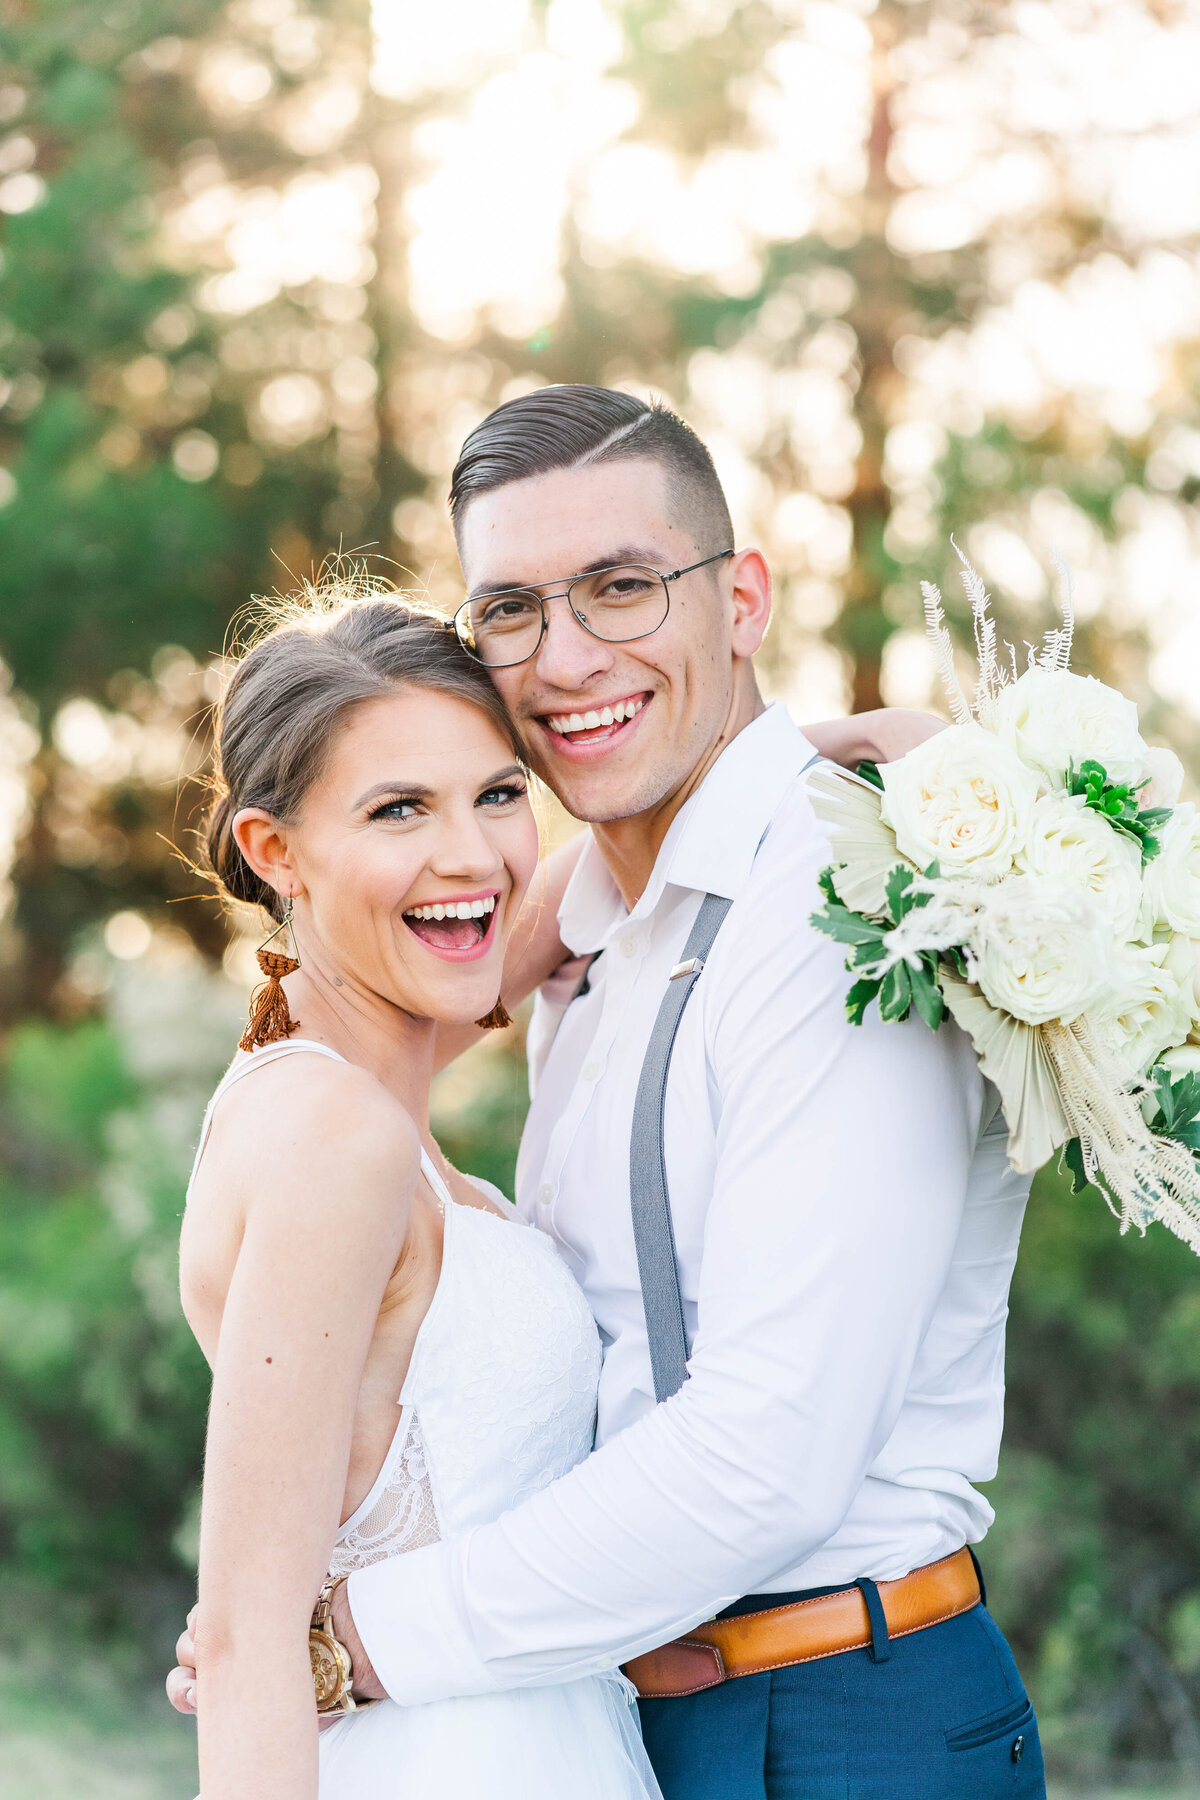 Bride and groom smiling on their wedding day with white bouquet